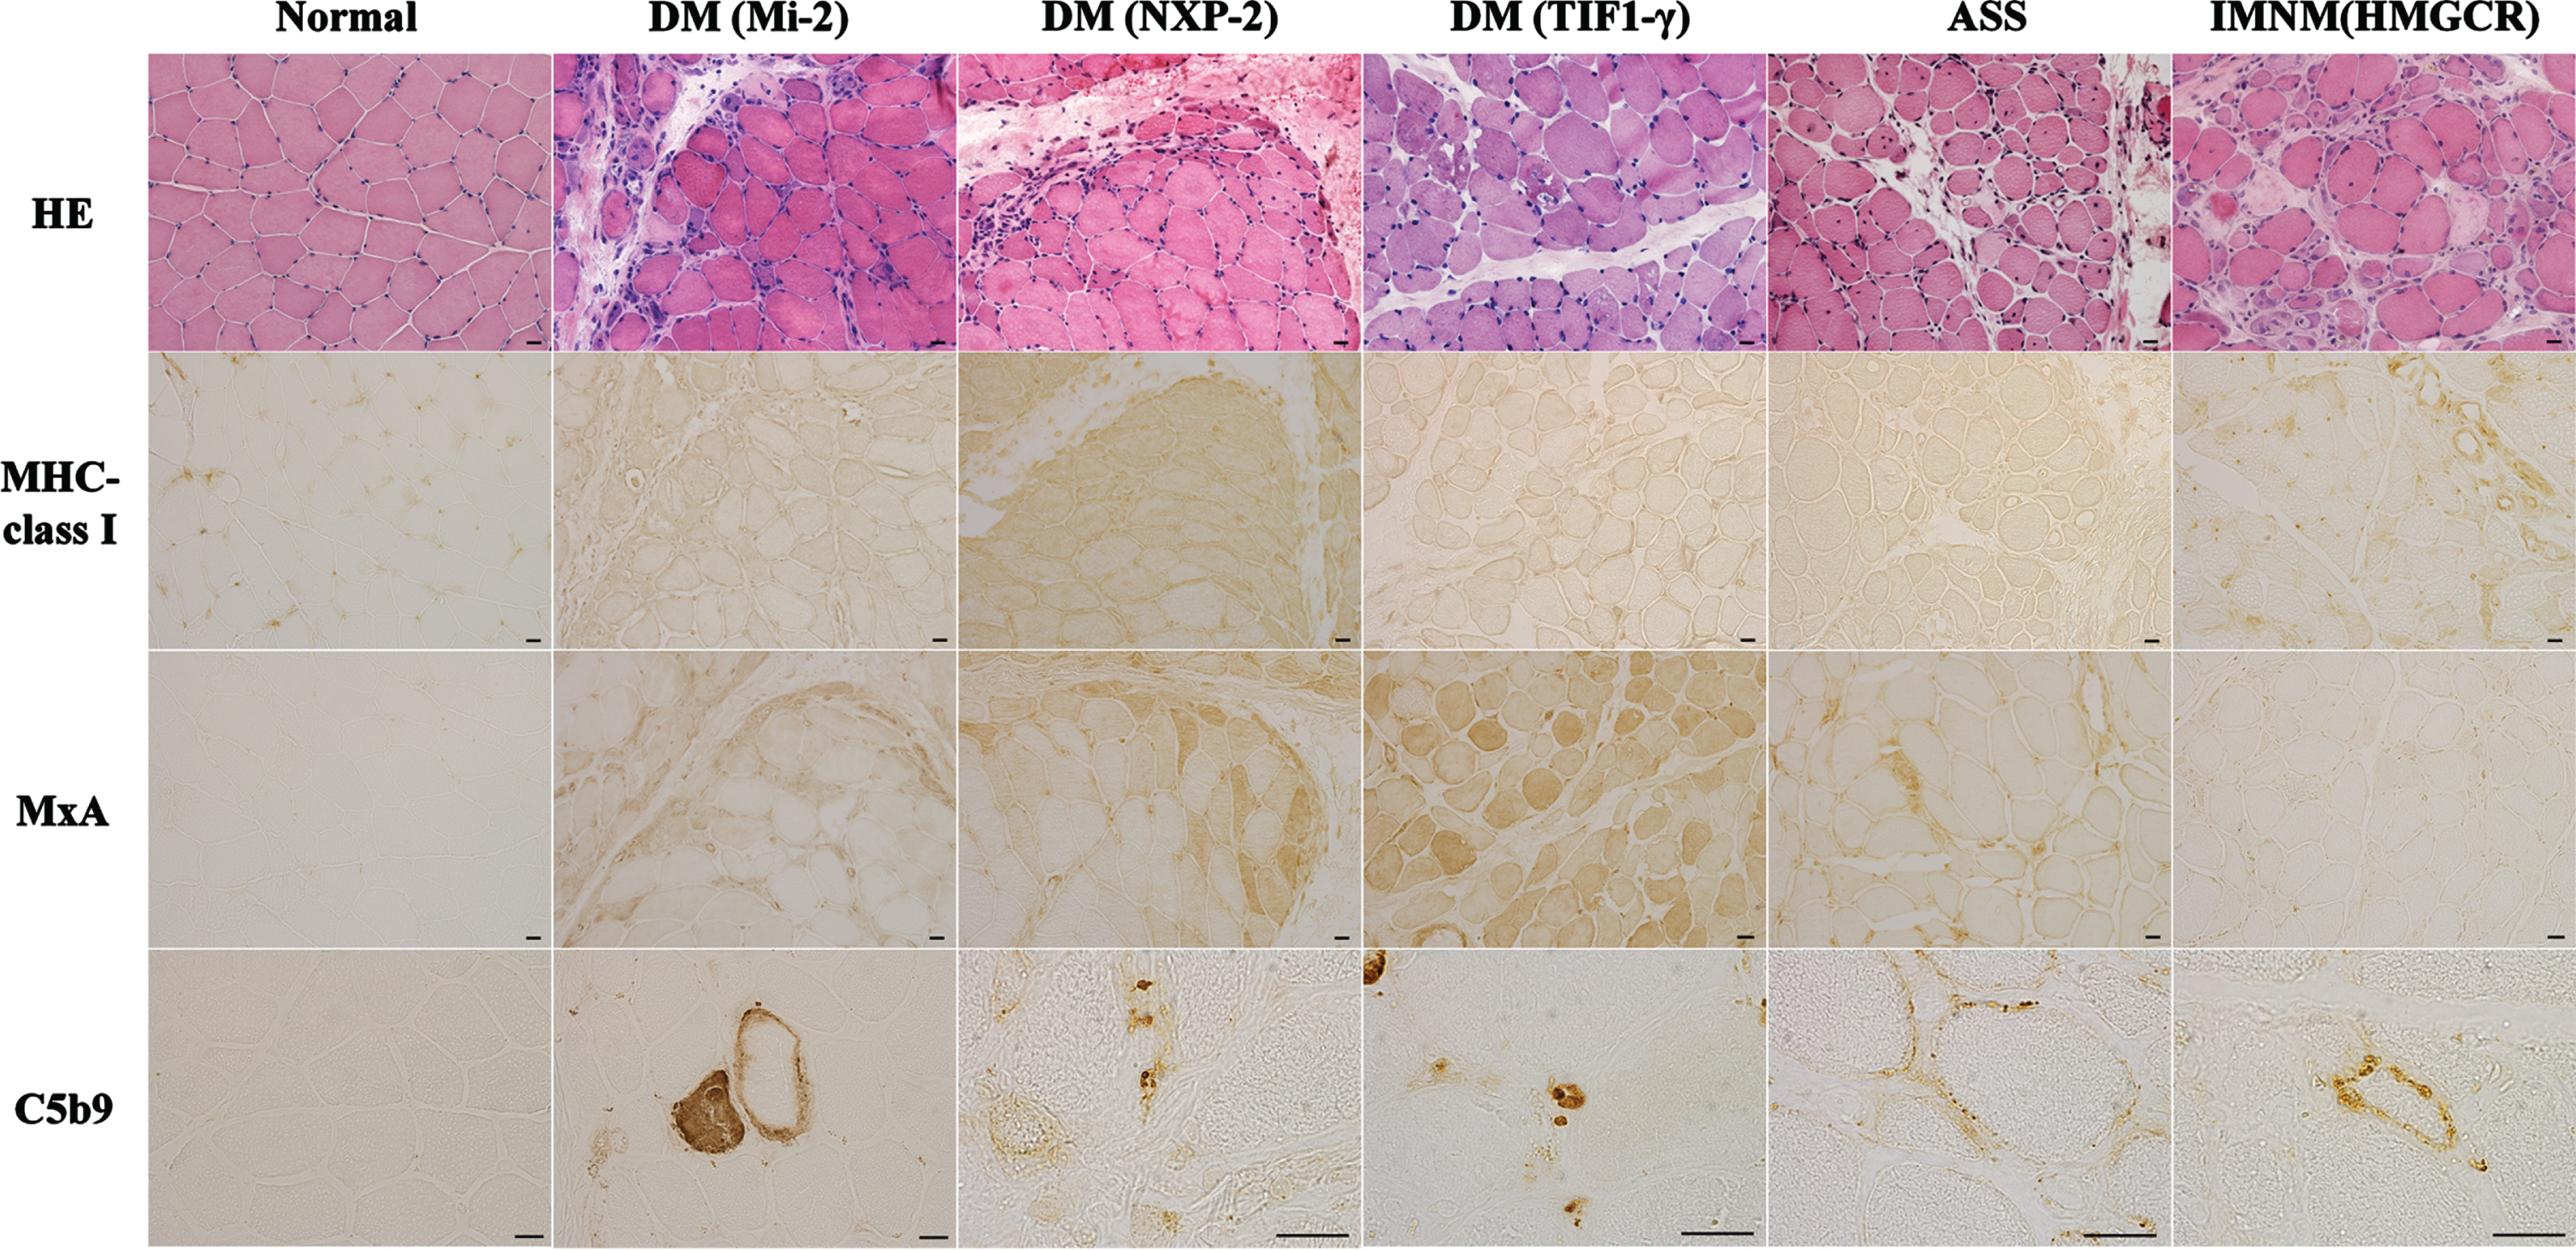 Represent muscle biopsy findings in different idiopathic inflammatory myopathies subtypes based on antibody subtypes. Hemotoxylin and eosin (HE) staining shows perifascicular necrosis and atrophy in anti-Mi-2 dermatomyositis (DM) and anti-NXP2 DM, perifascicular atrophy and vacuolated punched-out fibers in anti-TIF1-γ DM, myofiber necrosis and regeneration in anti-synthetase syndrome (ASS) and immune-mediated necrotizing myopathy (IMNM). Positivity of HLA-ABC immunostaining is observed in anti-Mi-2 DM, anti-NXP2 DM, anti-TIF1-γ DM, ASS and IMNM. Sarcoplasmic Myxovirus Resistance Protein A (MxA) positivity in perifascicular is observed in anti-Mi-2 DM, anti-NXP2 DM and anti-TIF1-γ DM. Deposition of C5b9 is present in capillaries in anti-NXP2 DM and anti-TIF1-γ DM and in muscle fiber membrane in anti-Mi-2 DM, ASS and anti-HMGCR IMNM. Scale bar = 20μm.